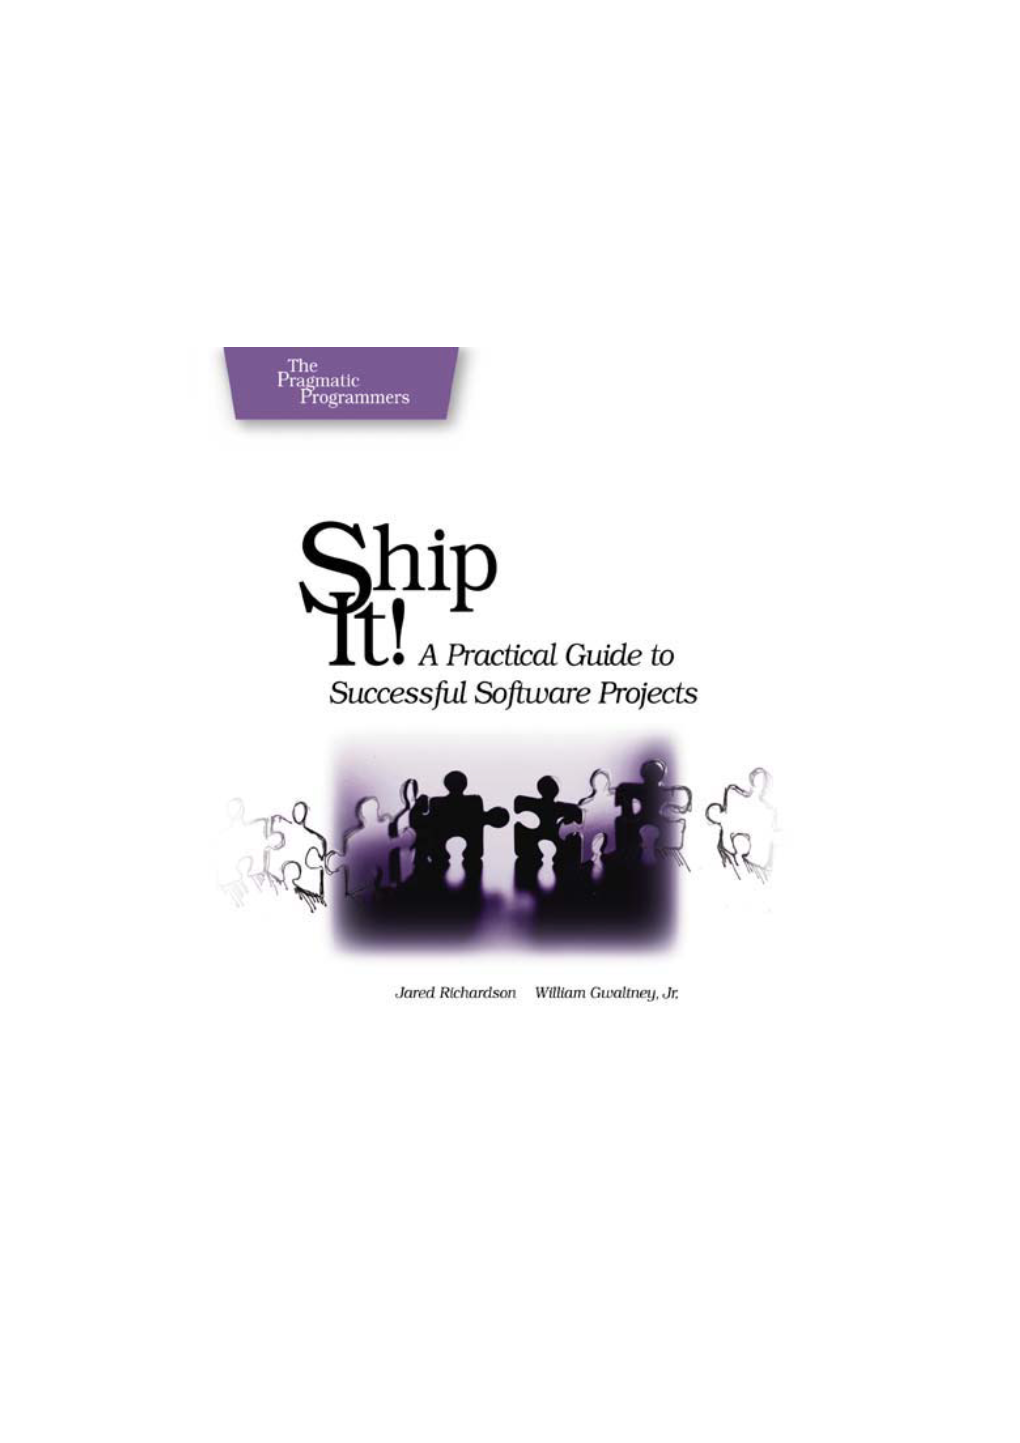 Ship It a Practical Guide to Successful Software Projects.Pdf